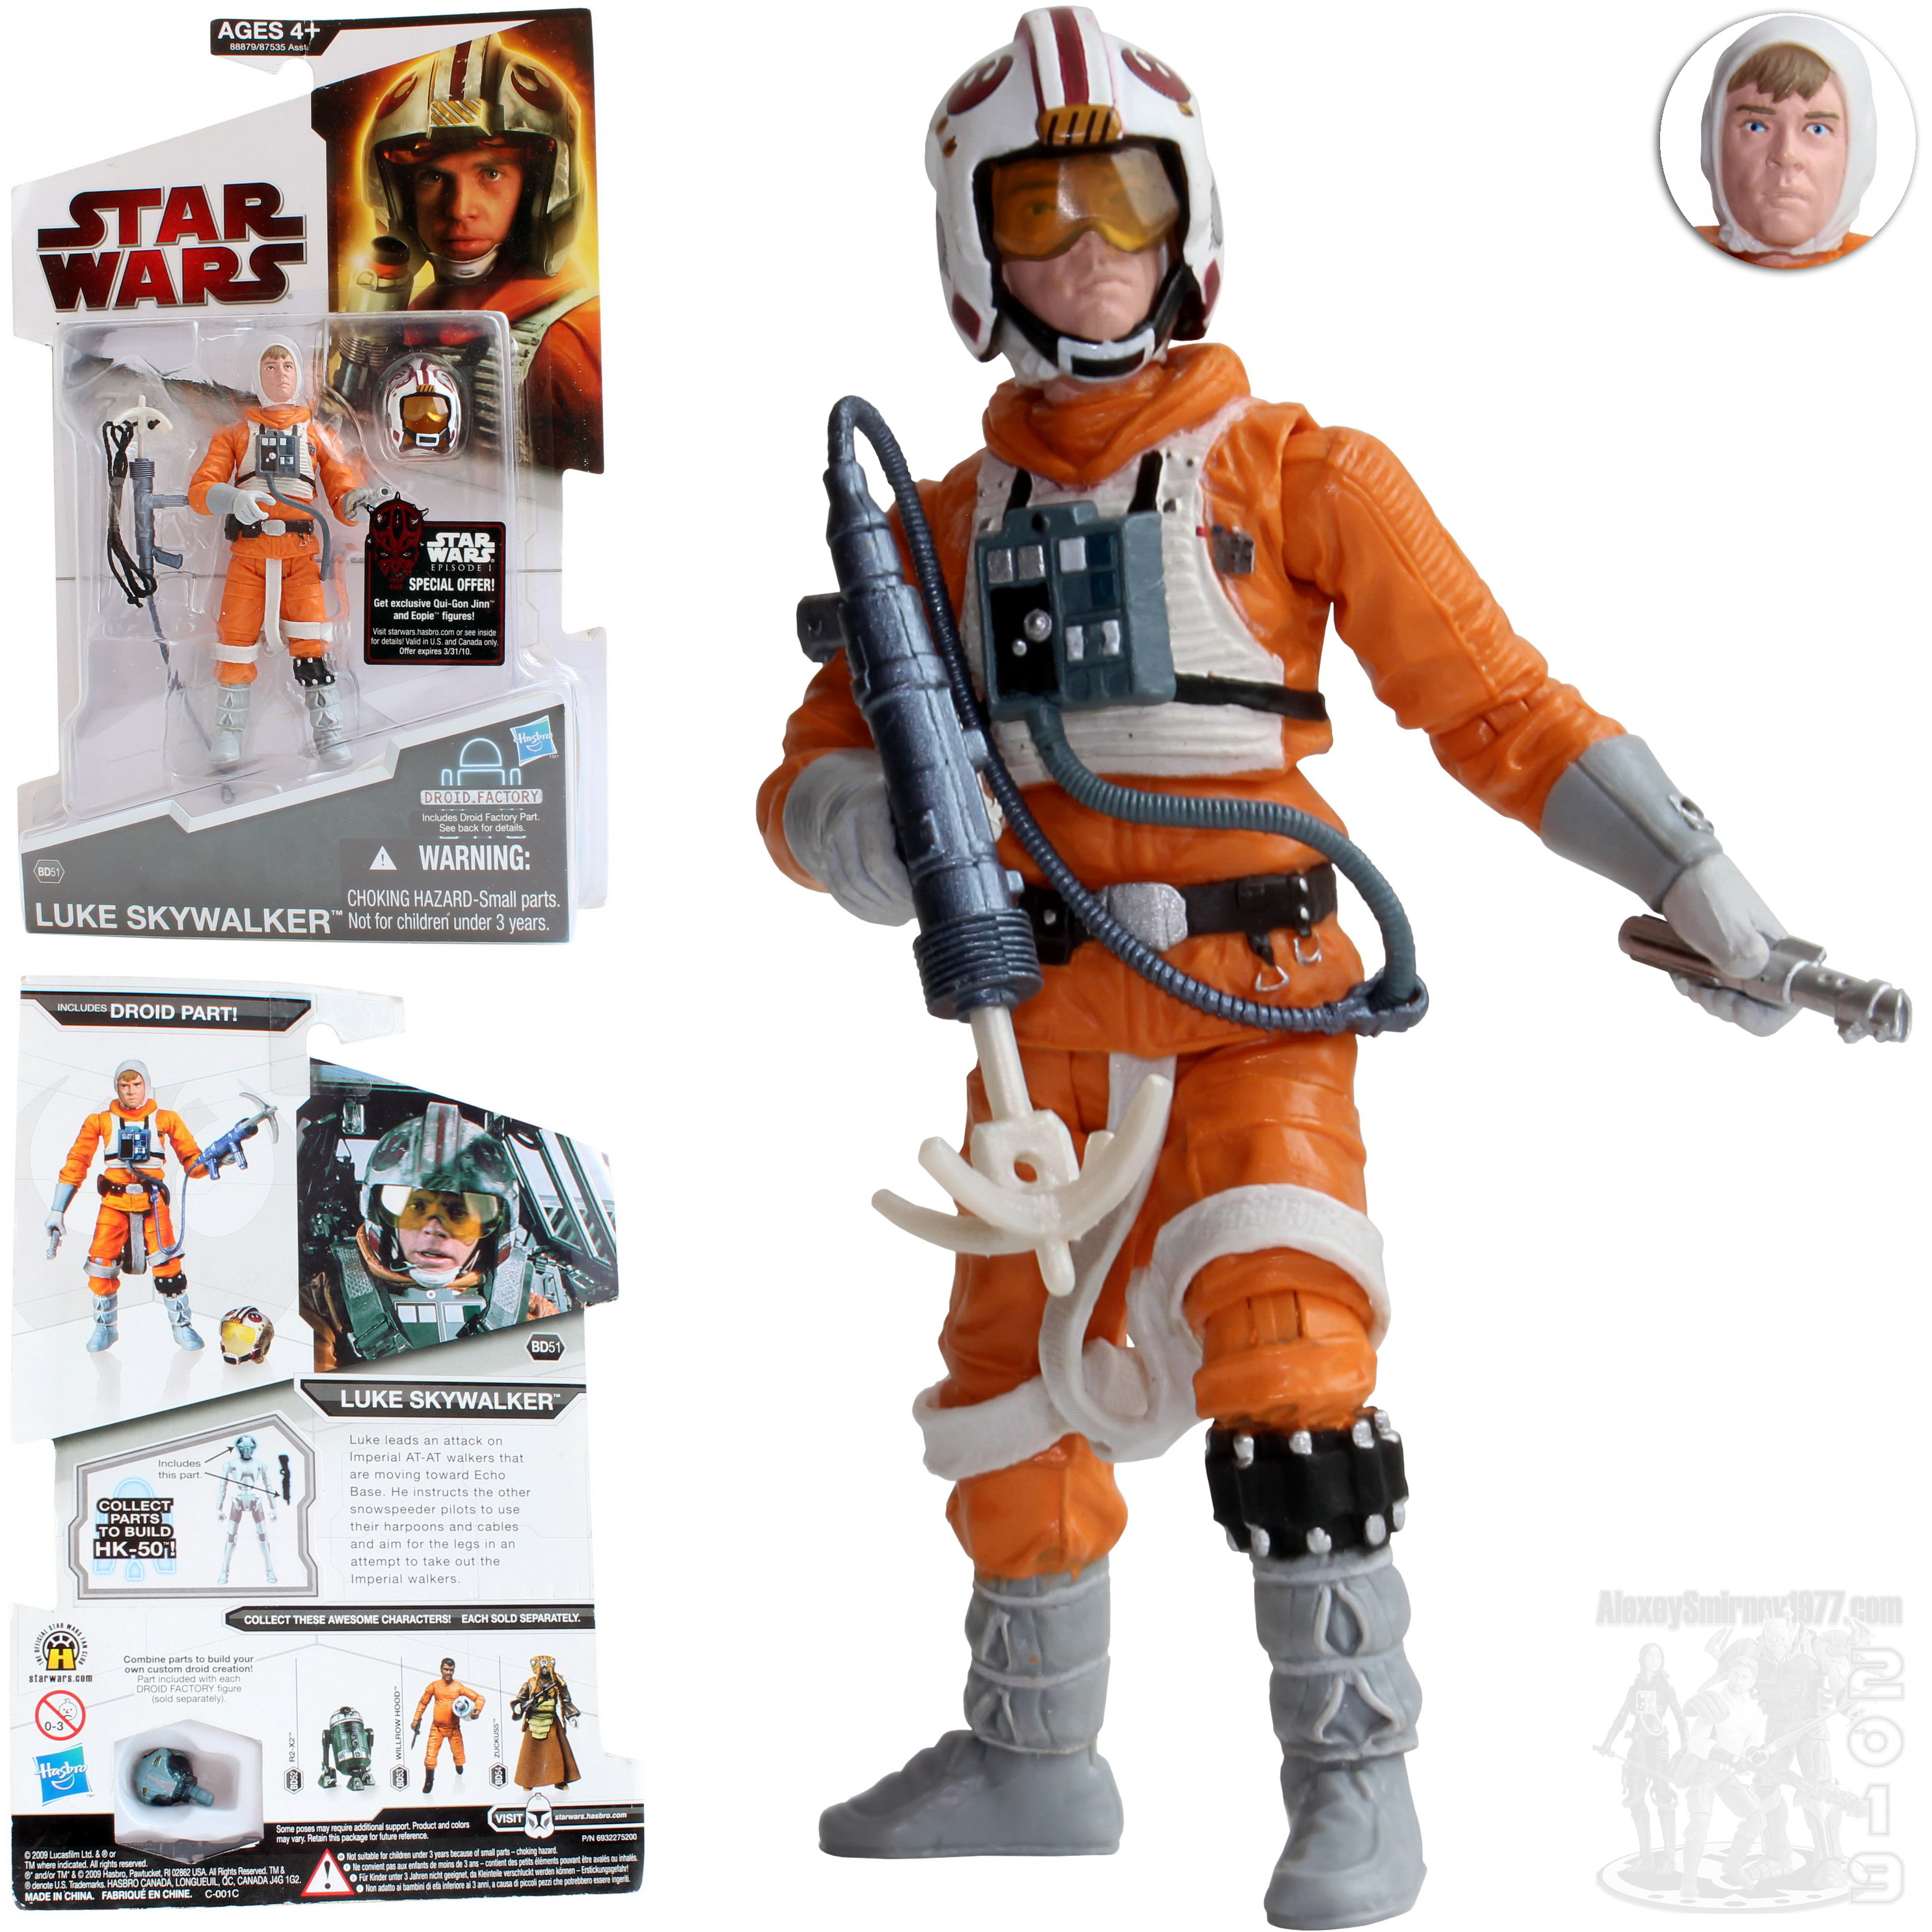 Hasbro Star Wars Legacy Collection Zuckuss Action Figure Bd54 for sale online 